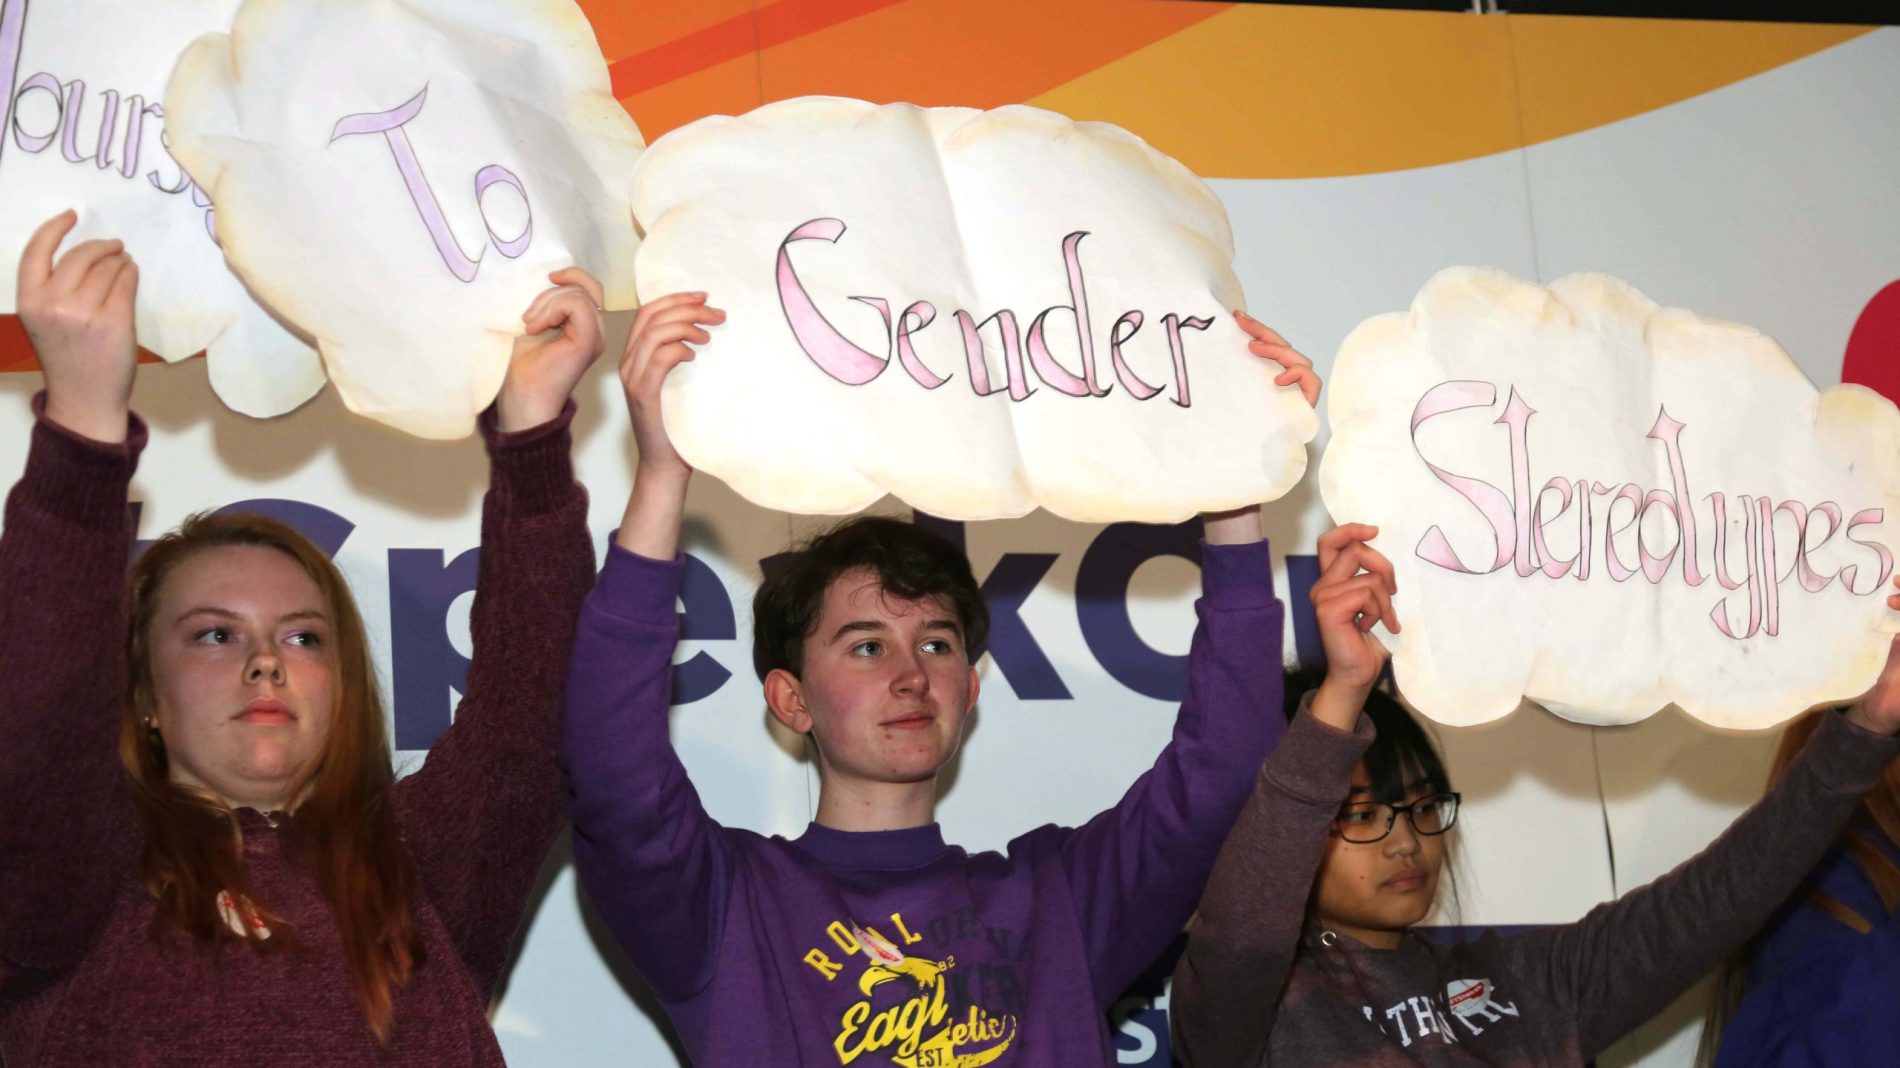 Students from Maryfield College hold up signs against gender stereotypes